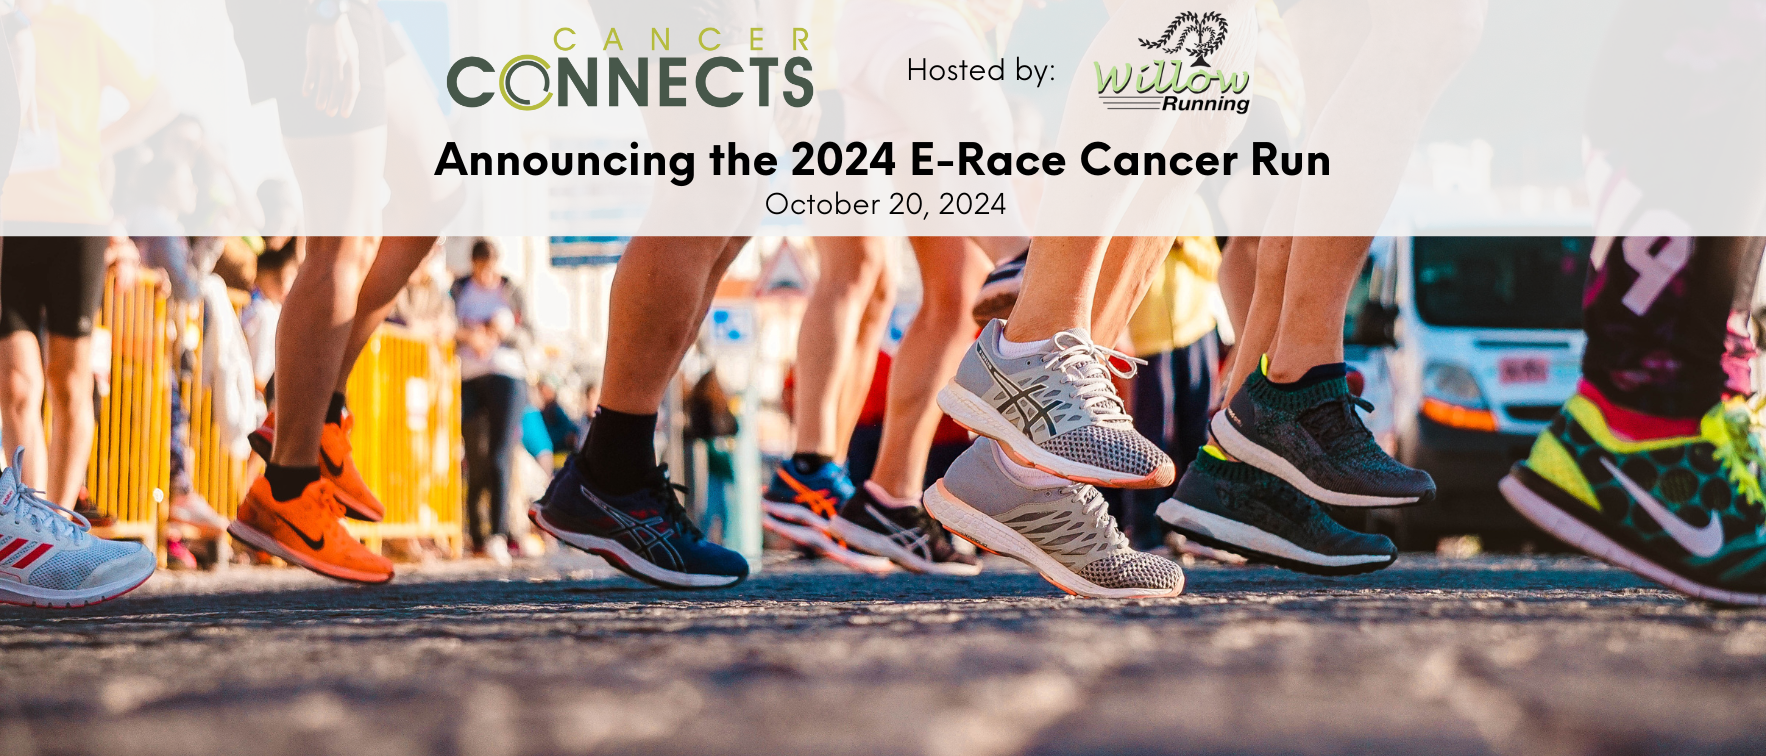 The Annual E-Race for Cancer is October 20, 2024!